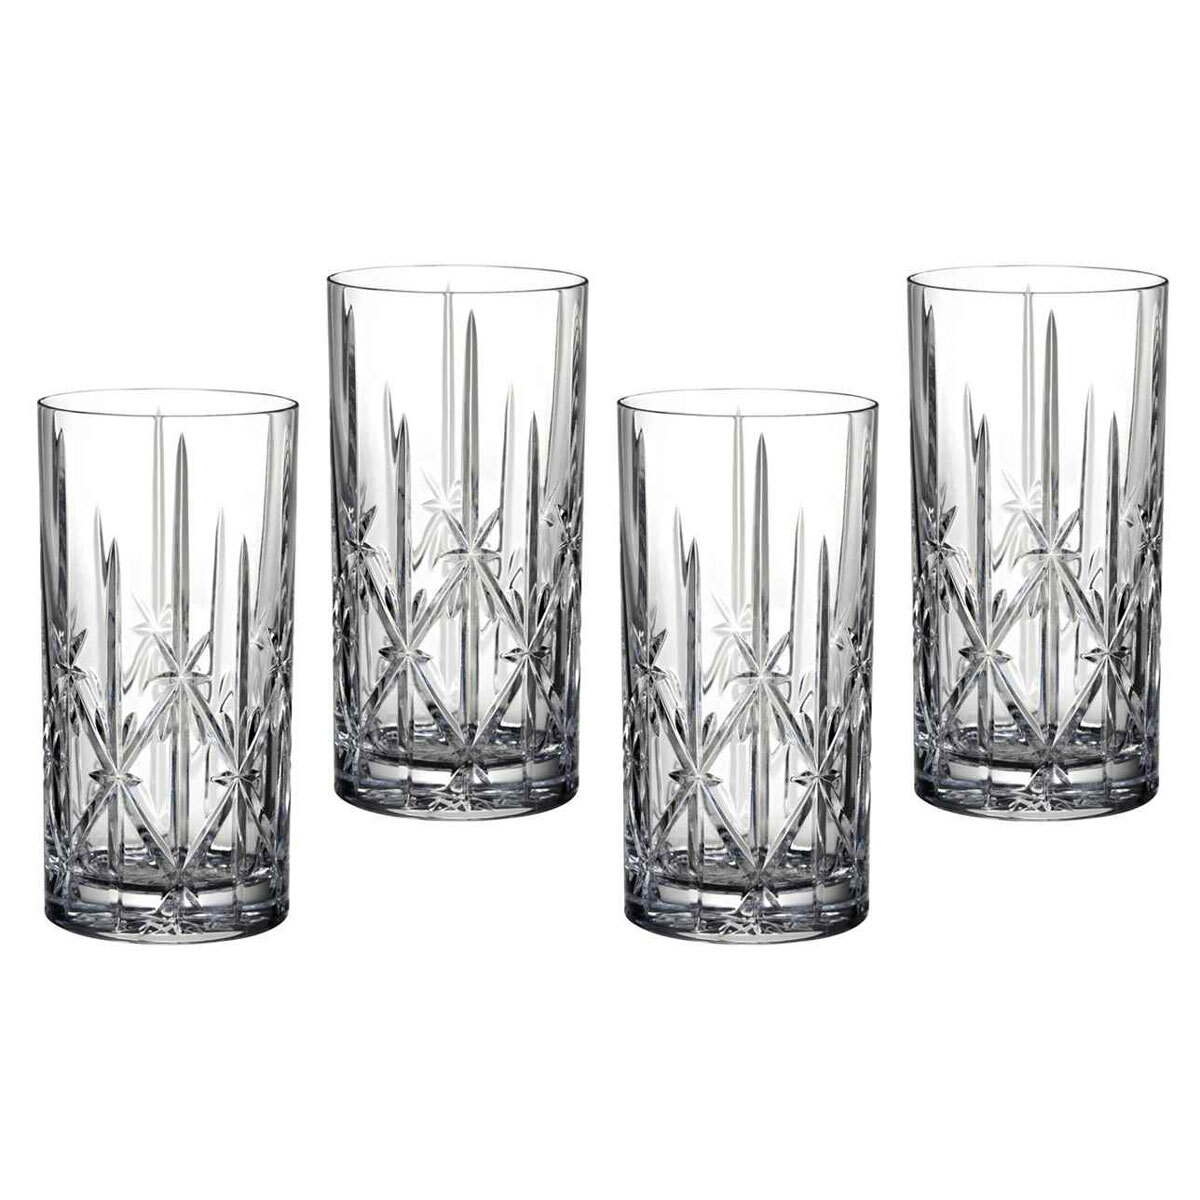 Waterford Marquis Sparkle Crystal Hiball Glasses, 4 Pack